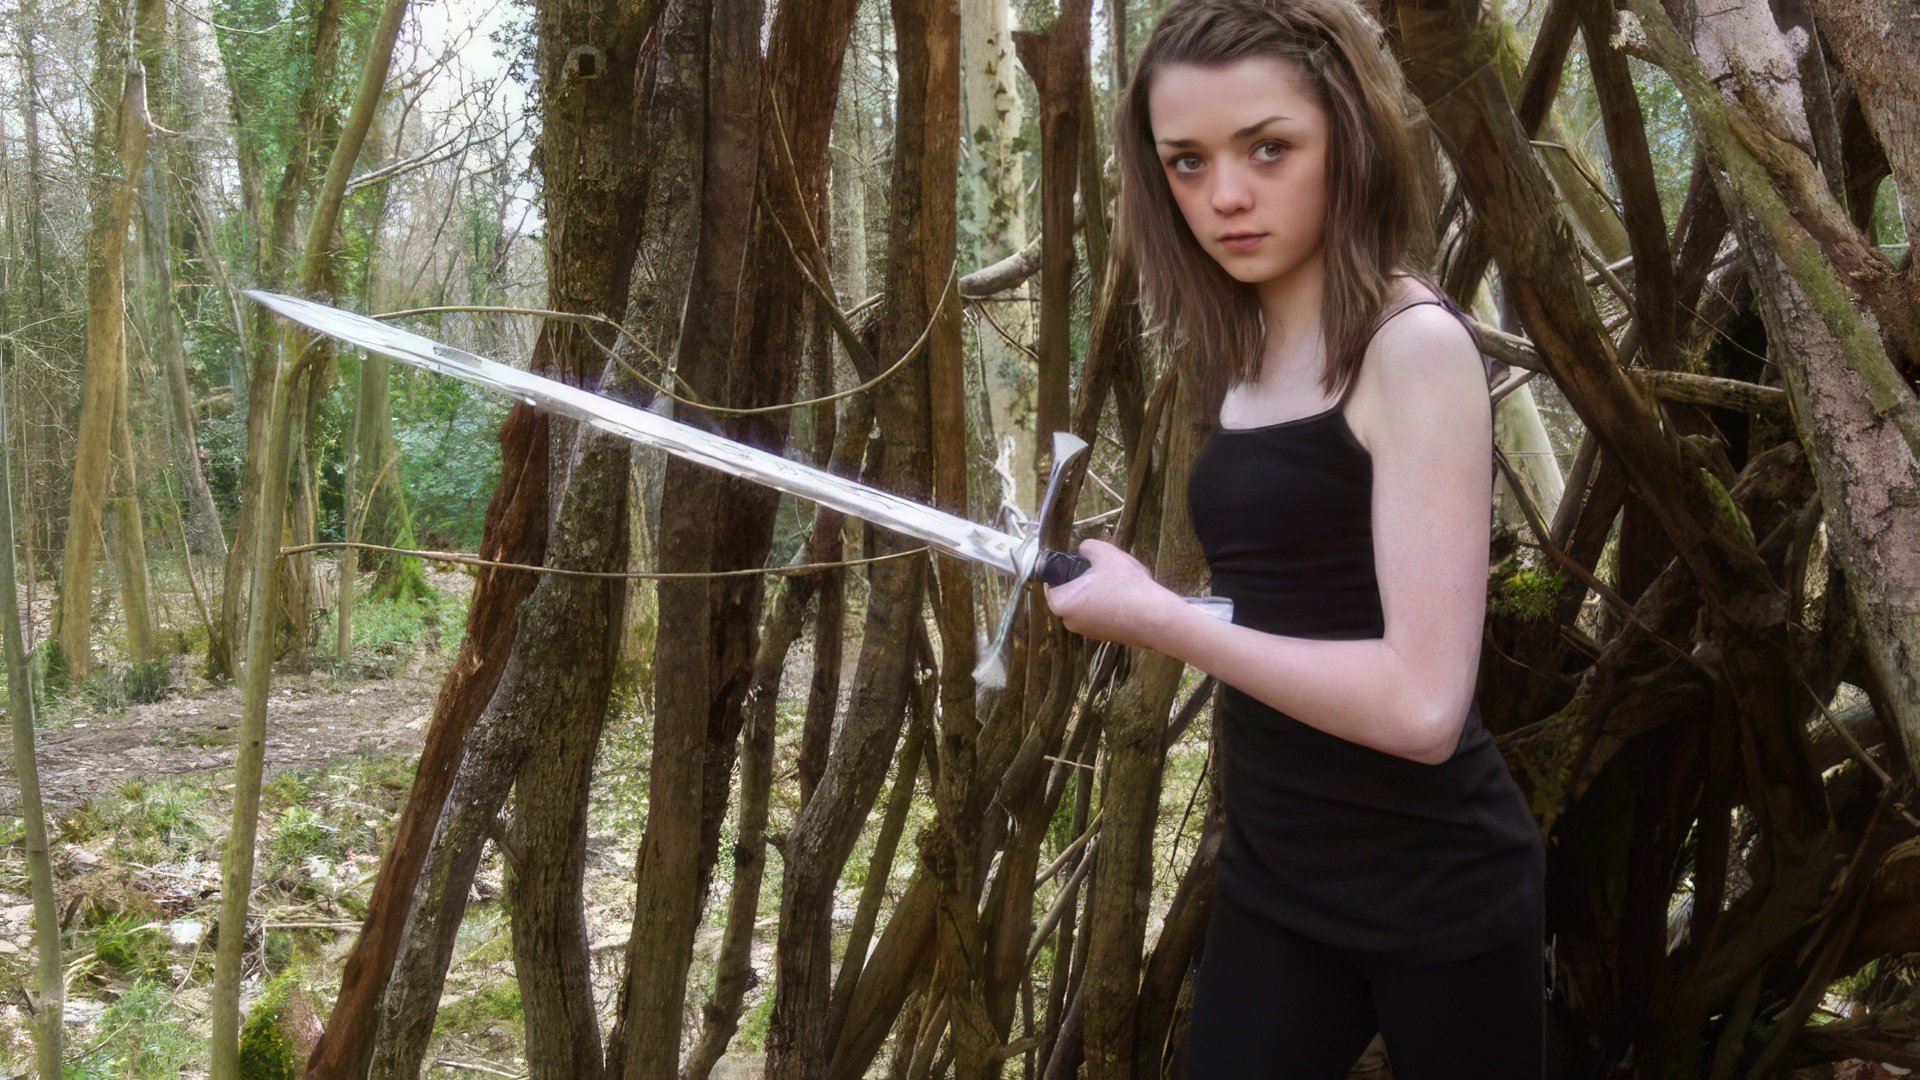 Like Arya Stark, Maisie Williams knows how to handle weapons